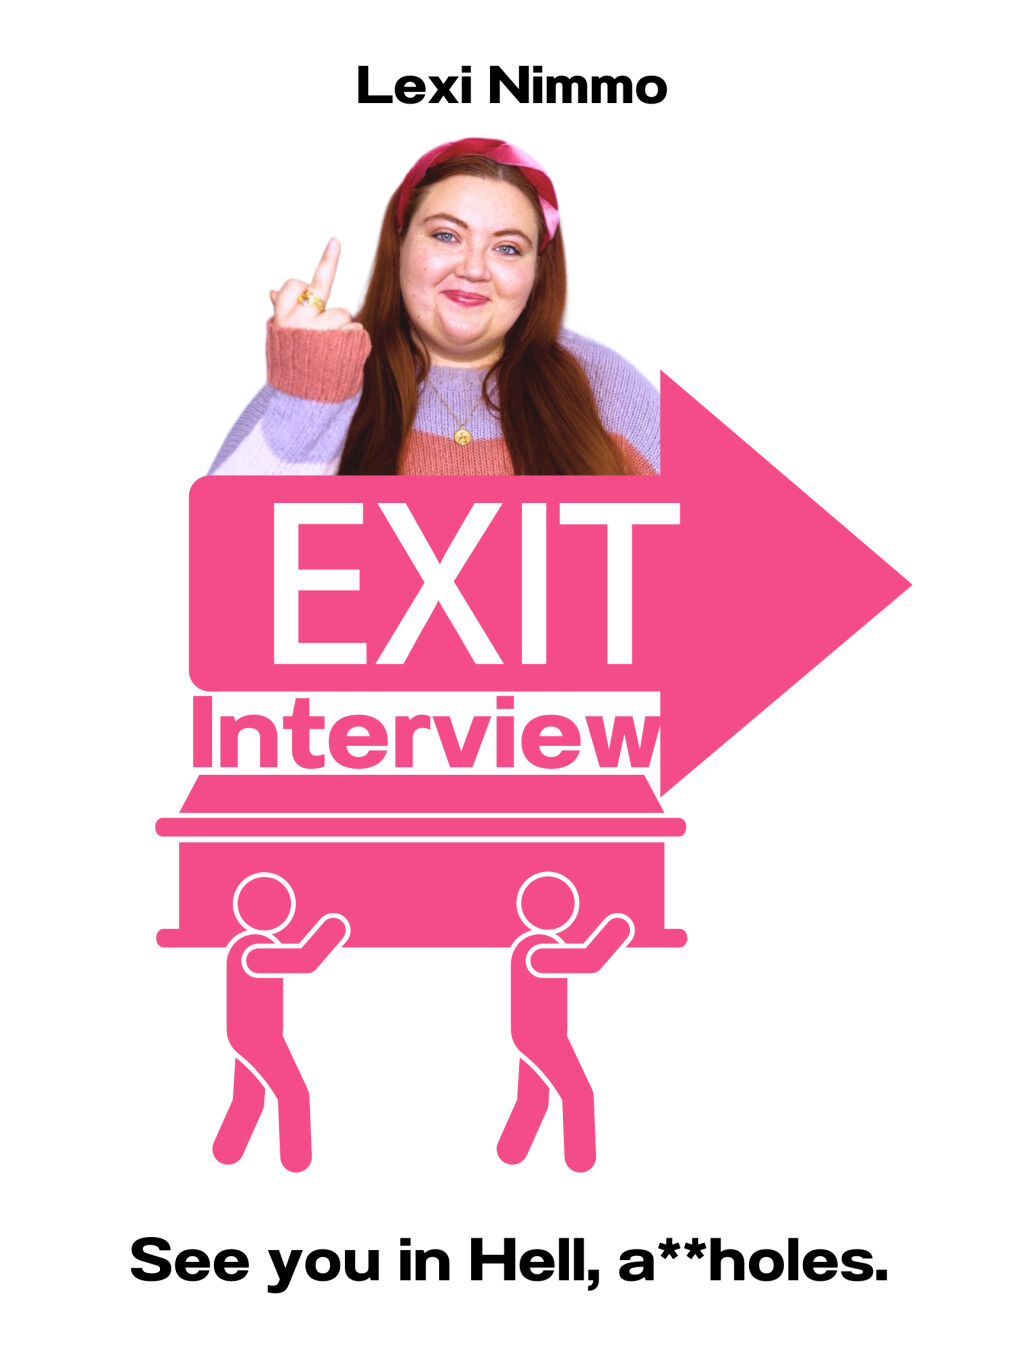 Filmposter for The Exit Interview